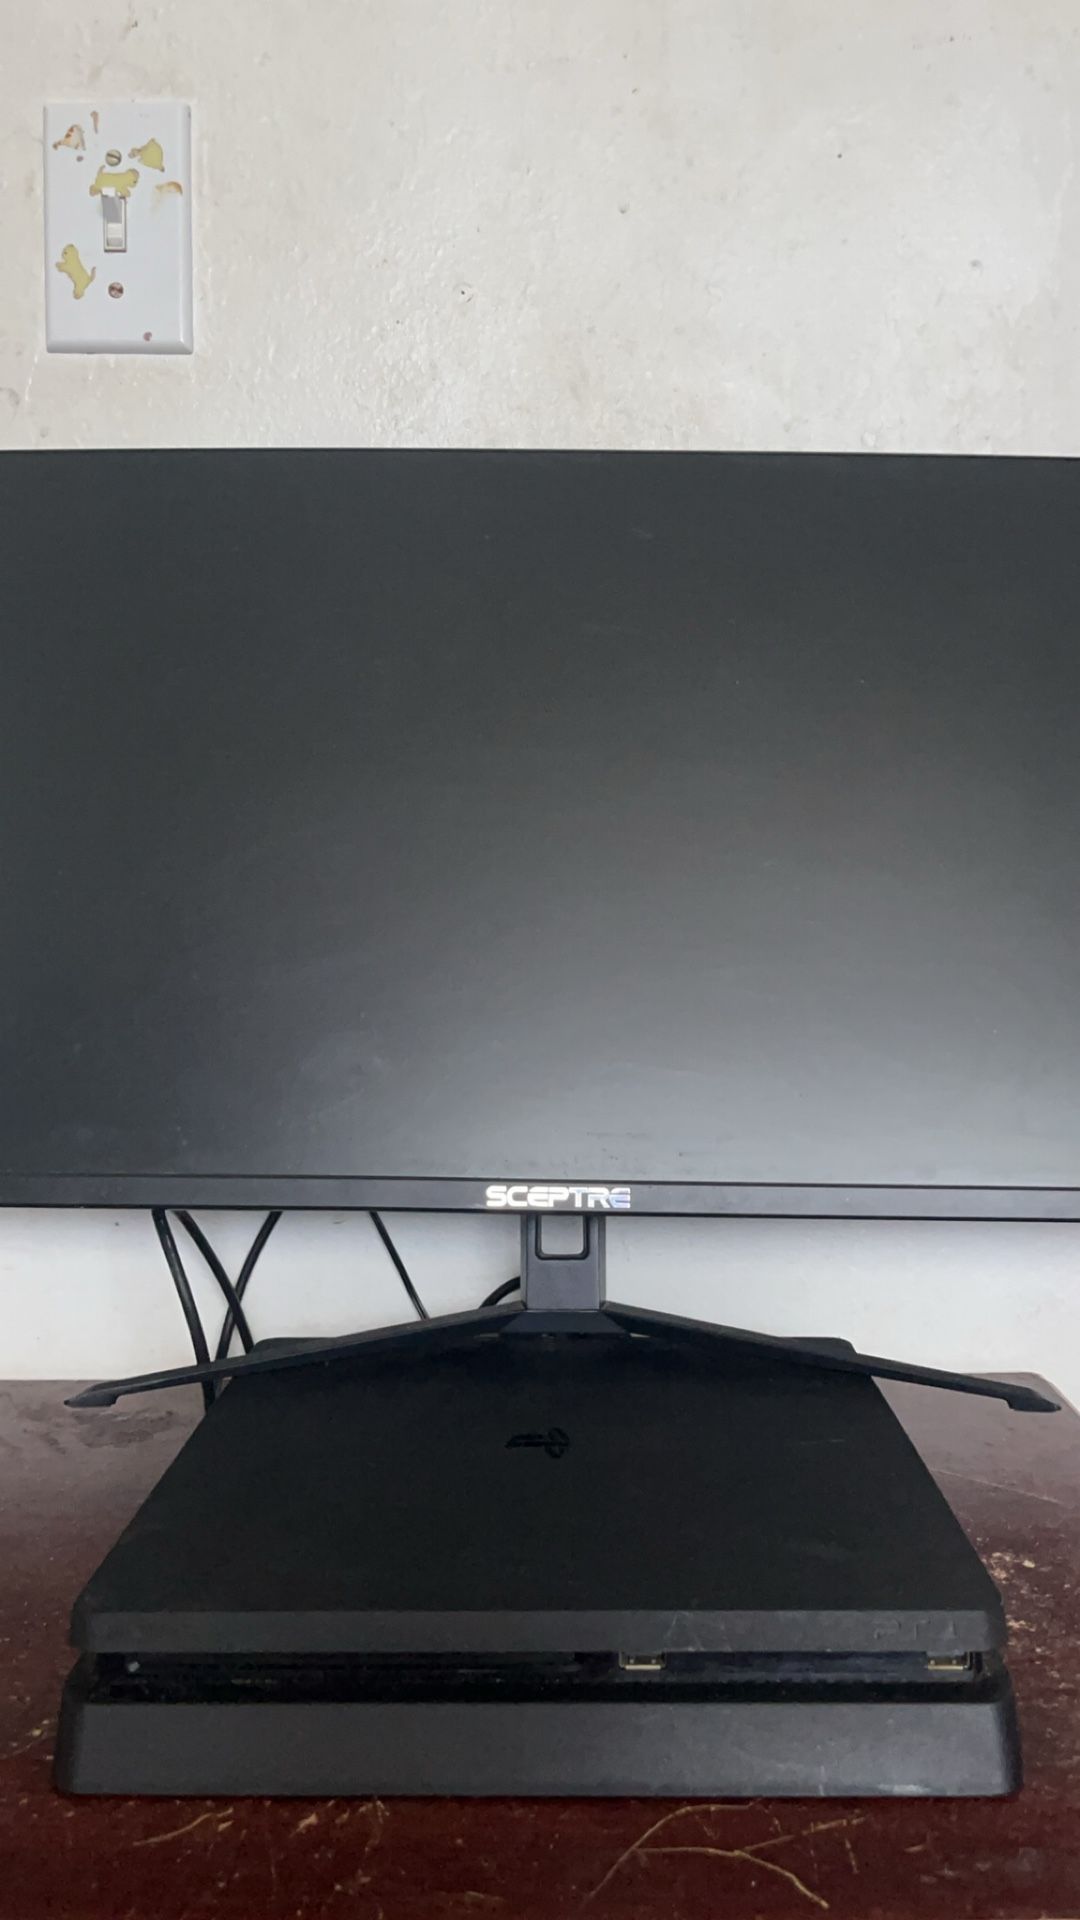 PS4 Slim With 144hz Sceptre monitor 